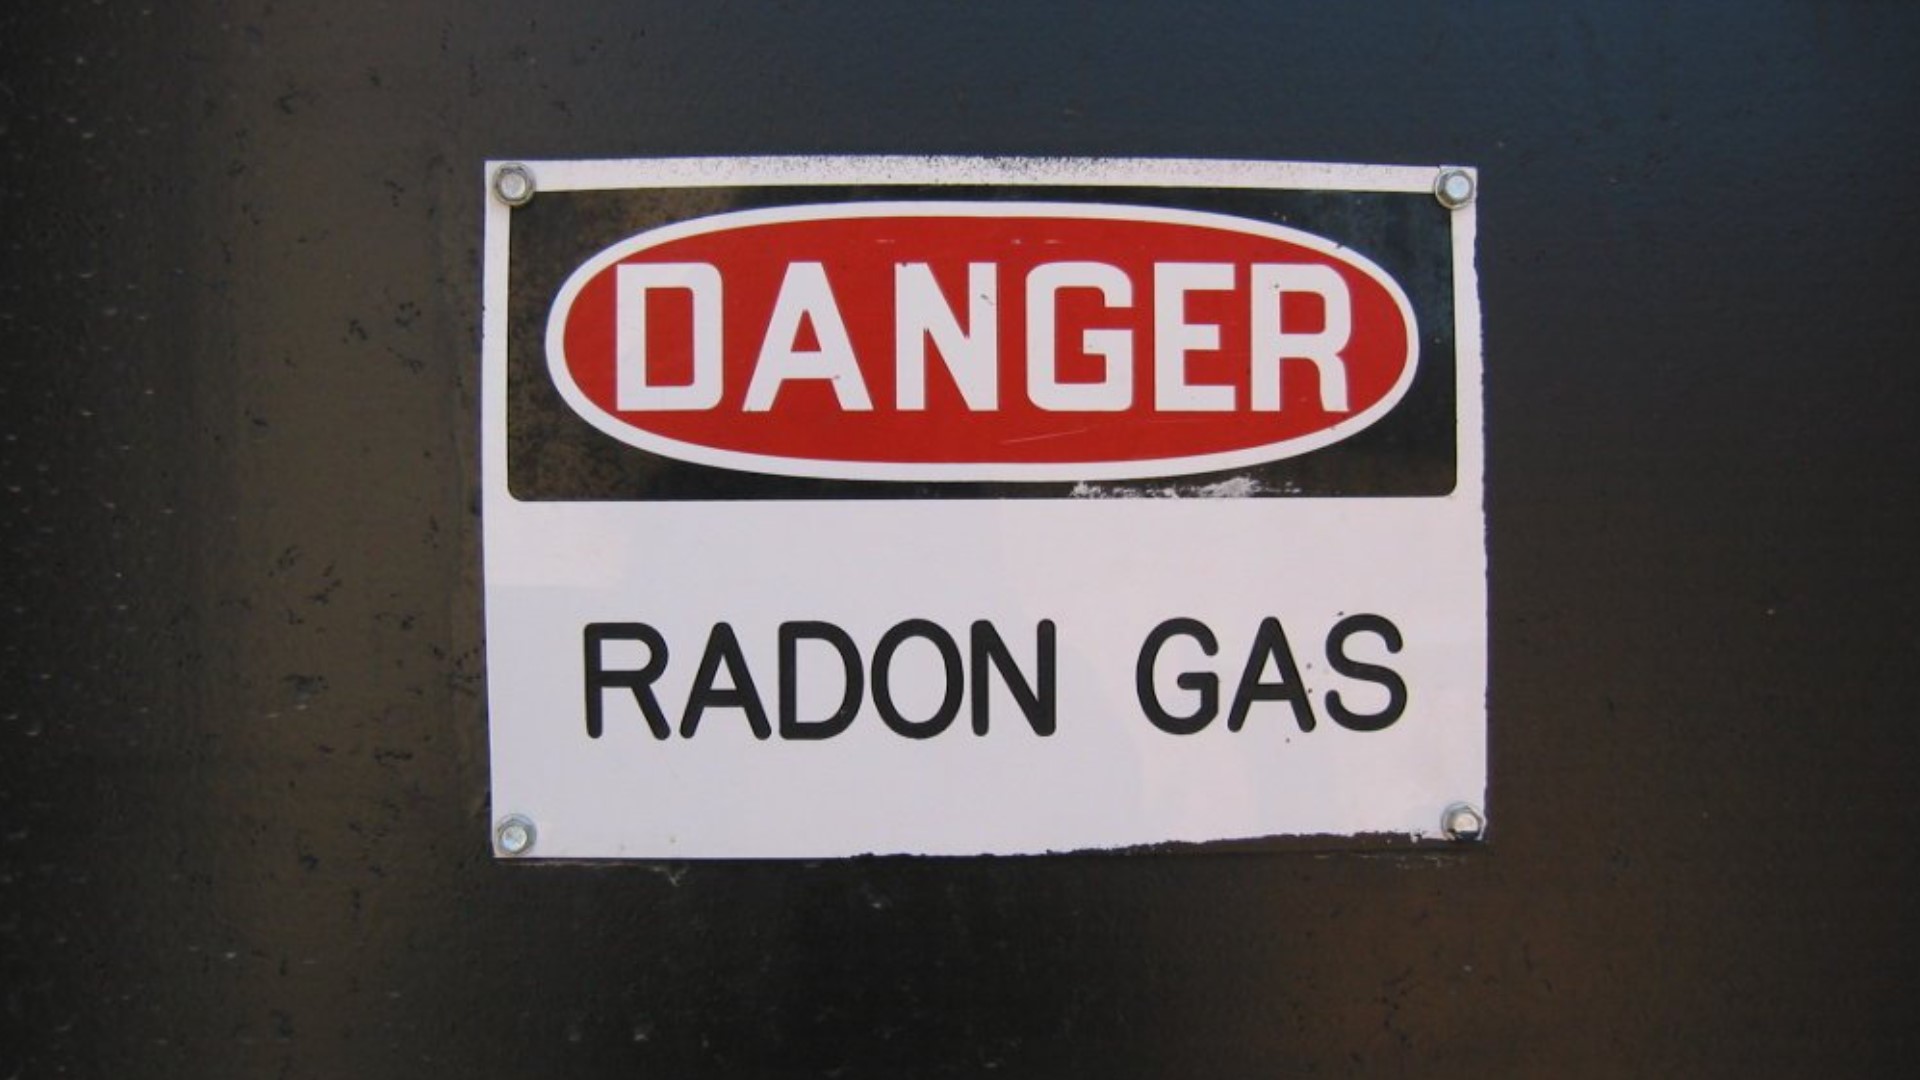 During National Radon Action Month in January, the American Lung Association urges everyone to test their home for radon.